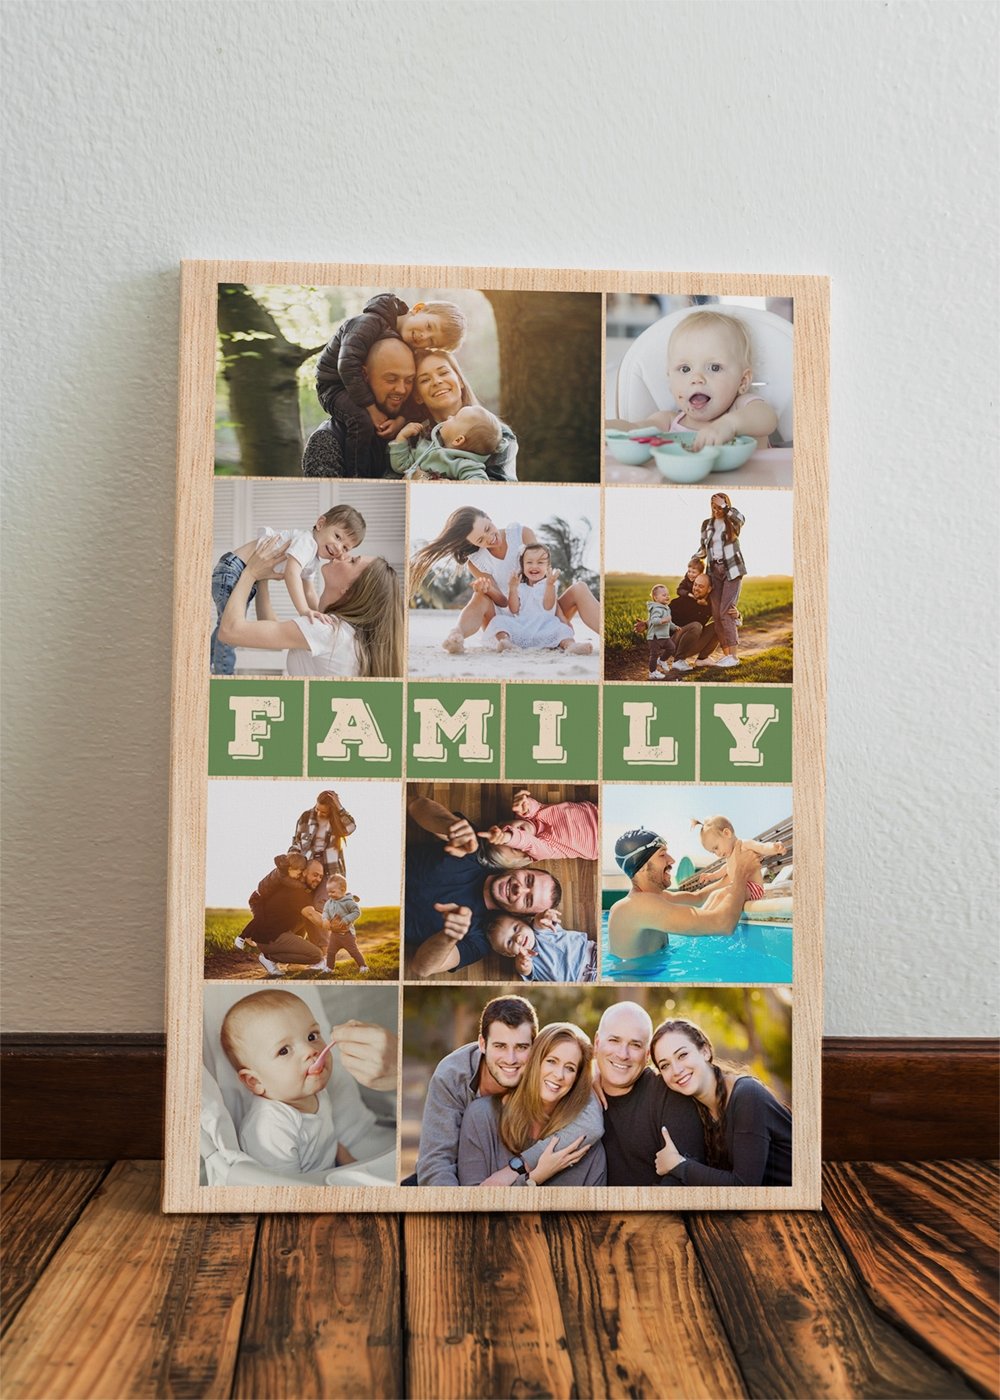 For the Grandpa who loves showing off pictures of his kids and grandkids, a Family Custom Photo Collage canvas wall art is a good gift suggestion. With a vertical light wood background, you can add many family pictures to save touching moments. It’s definitely a great gift for grandfather to feed his passion for showing off family pictures.